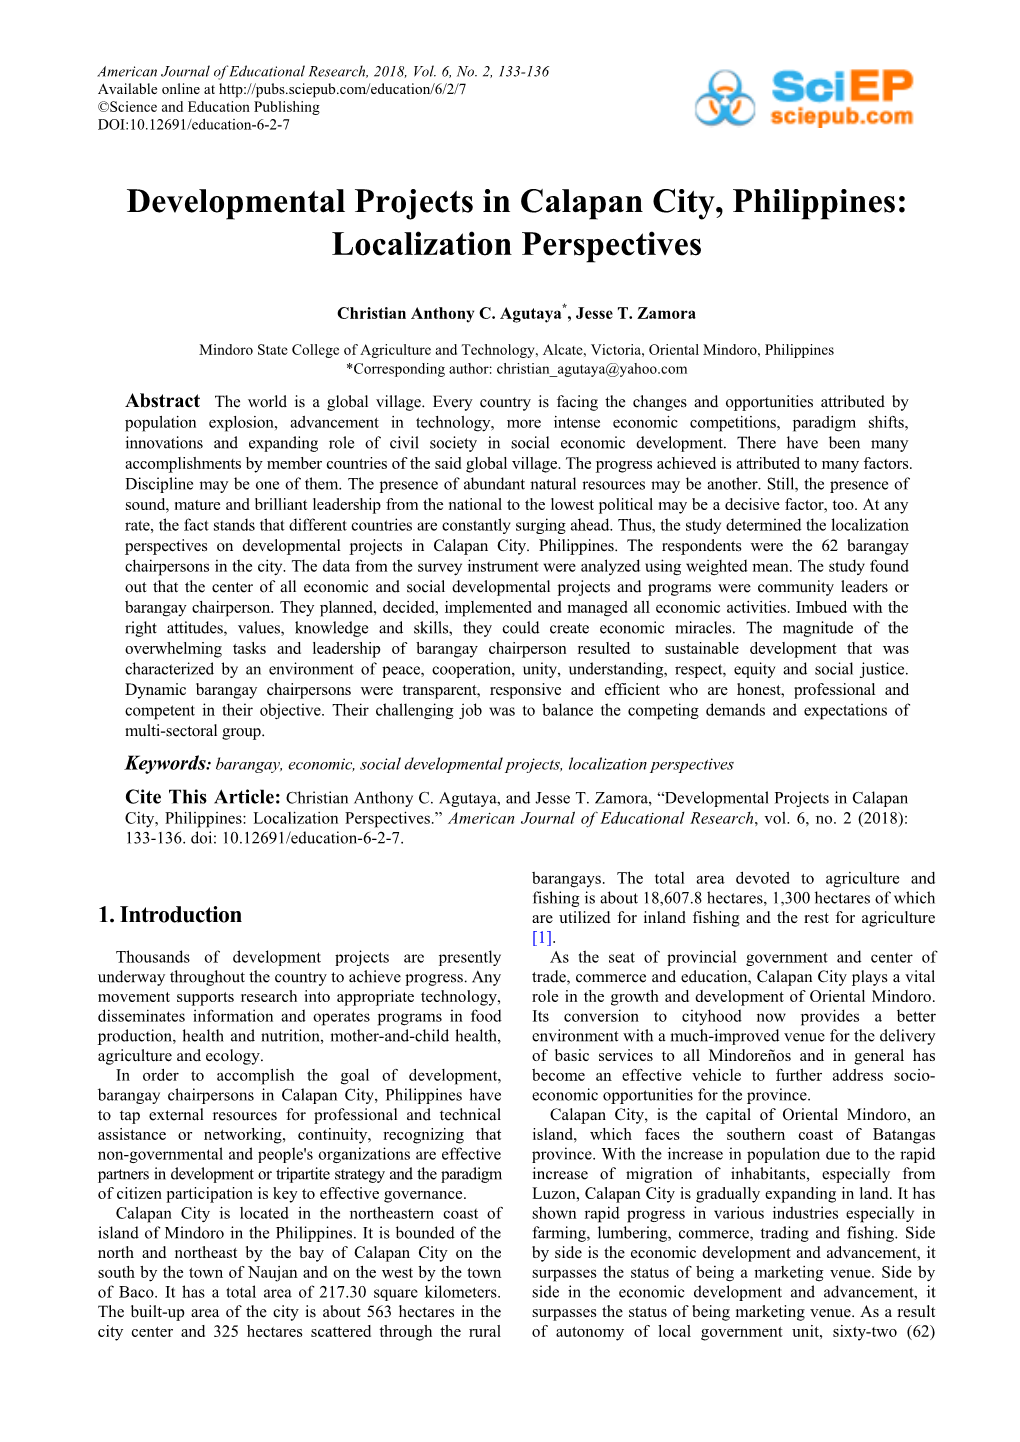 Developmental Projects in Calapan City, Philippines: Localization Perspectives